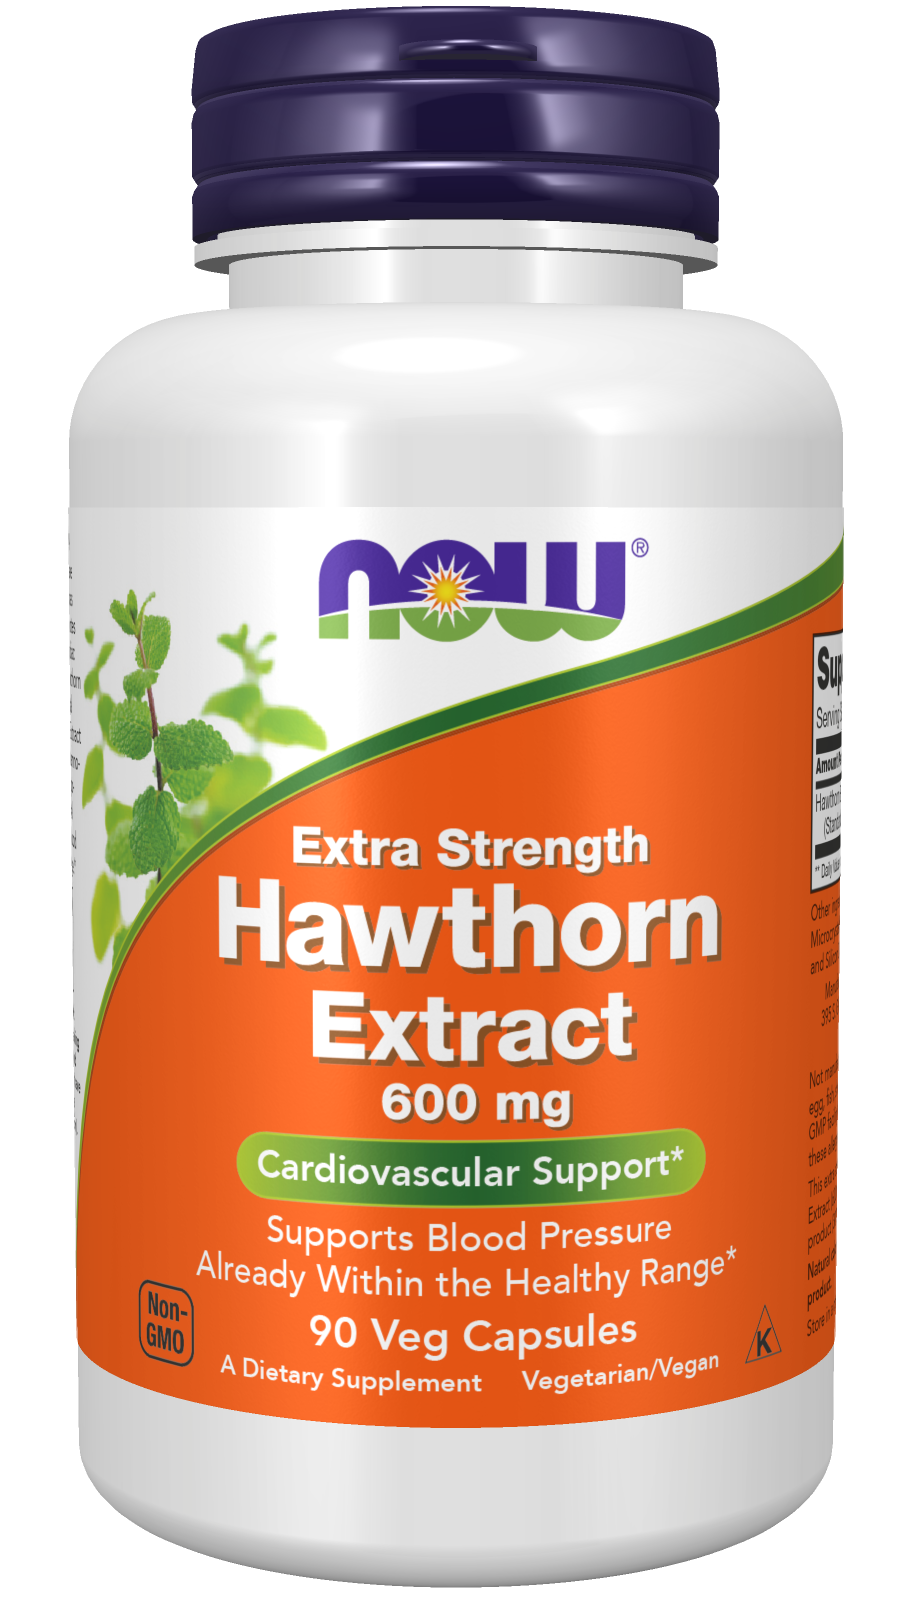 Hawthorn Extract 600 mg, Extra Strength - 90 Veg Capsules Bottle Front